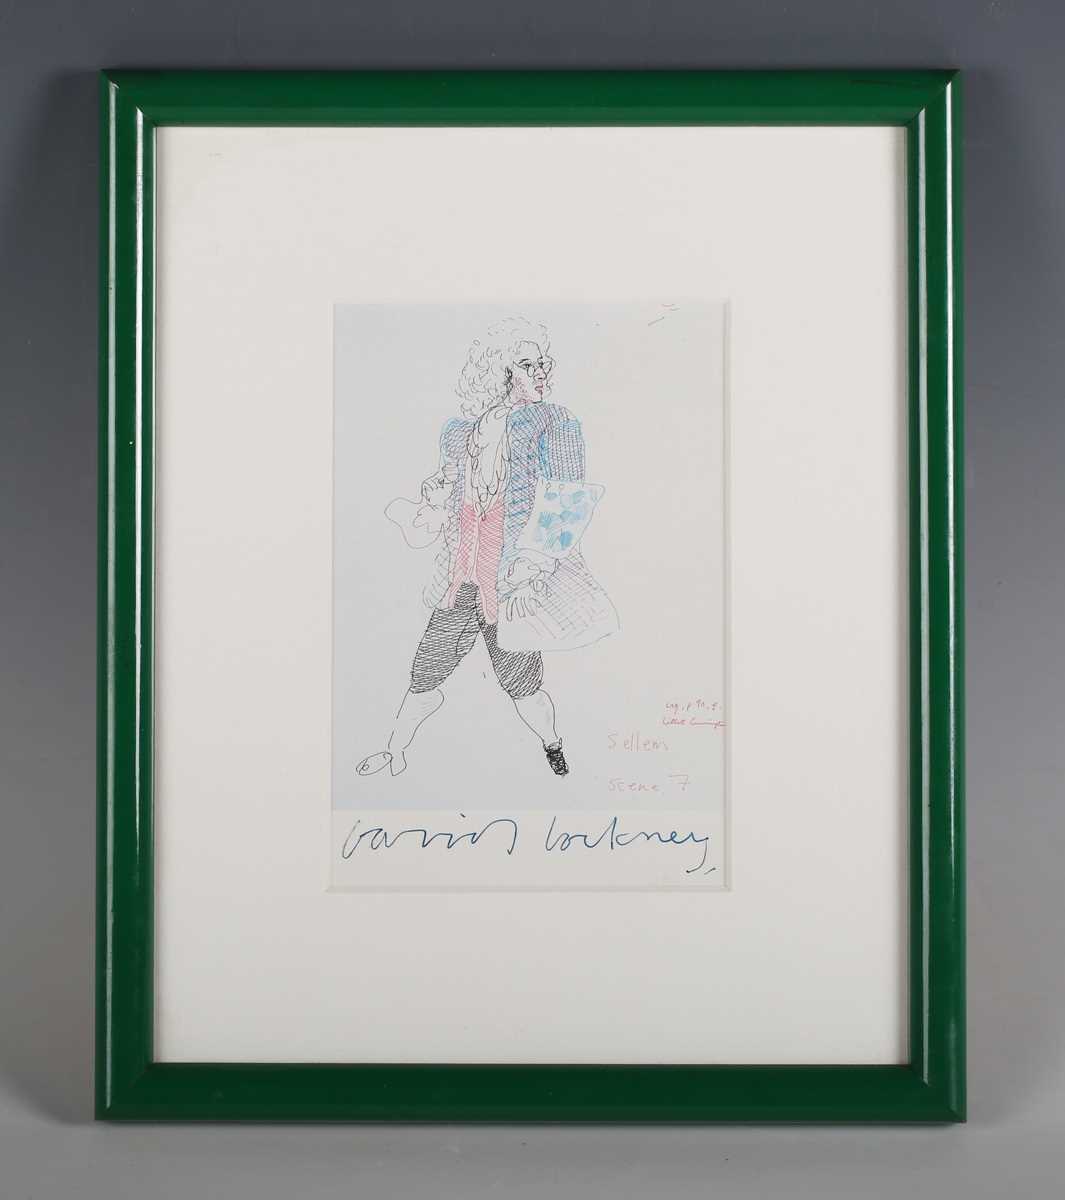 David Hockney – ‘The Rakes Progress’, 20th century offset lithographic postcard, signed in ink - Image 2 of 4